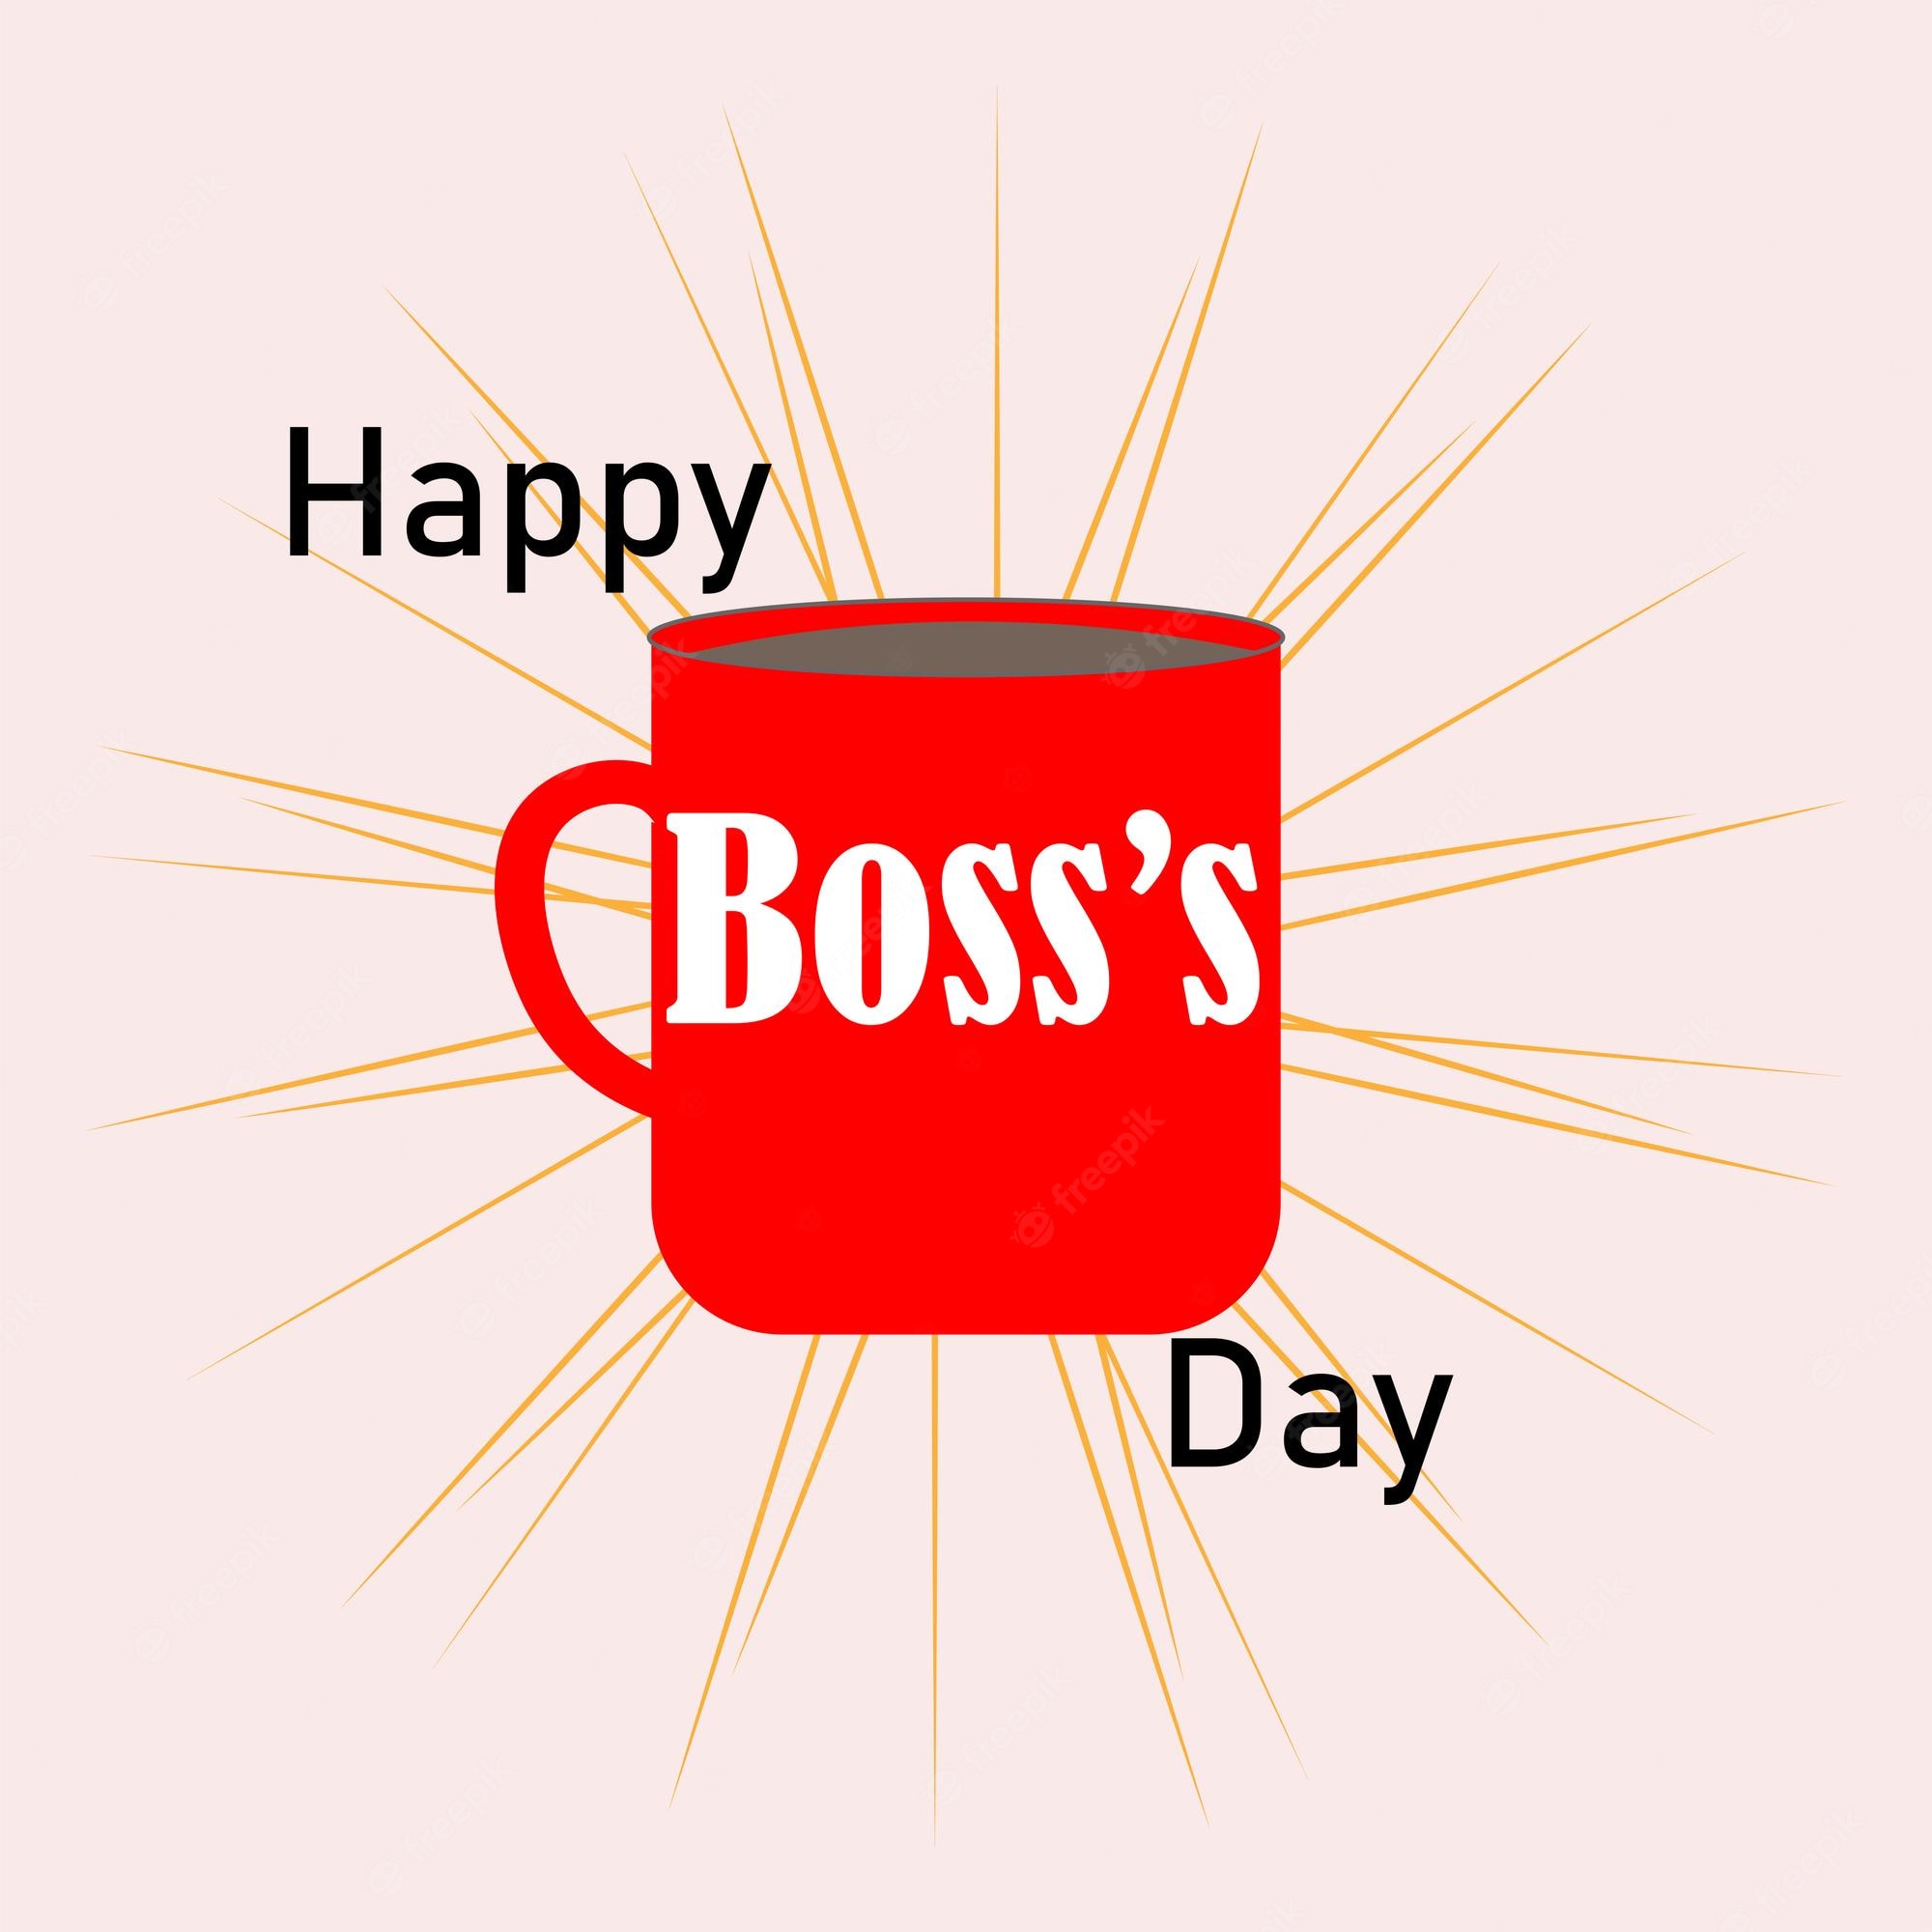 happy boss day clipart - Clip Art Library - Clip Art Library